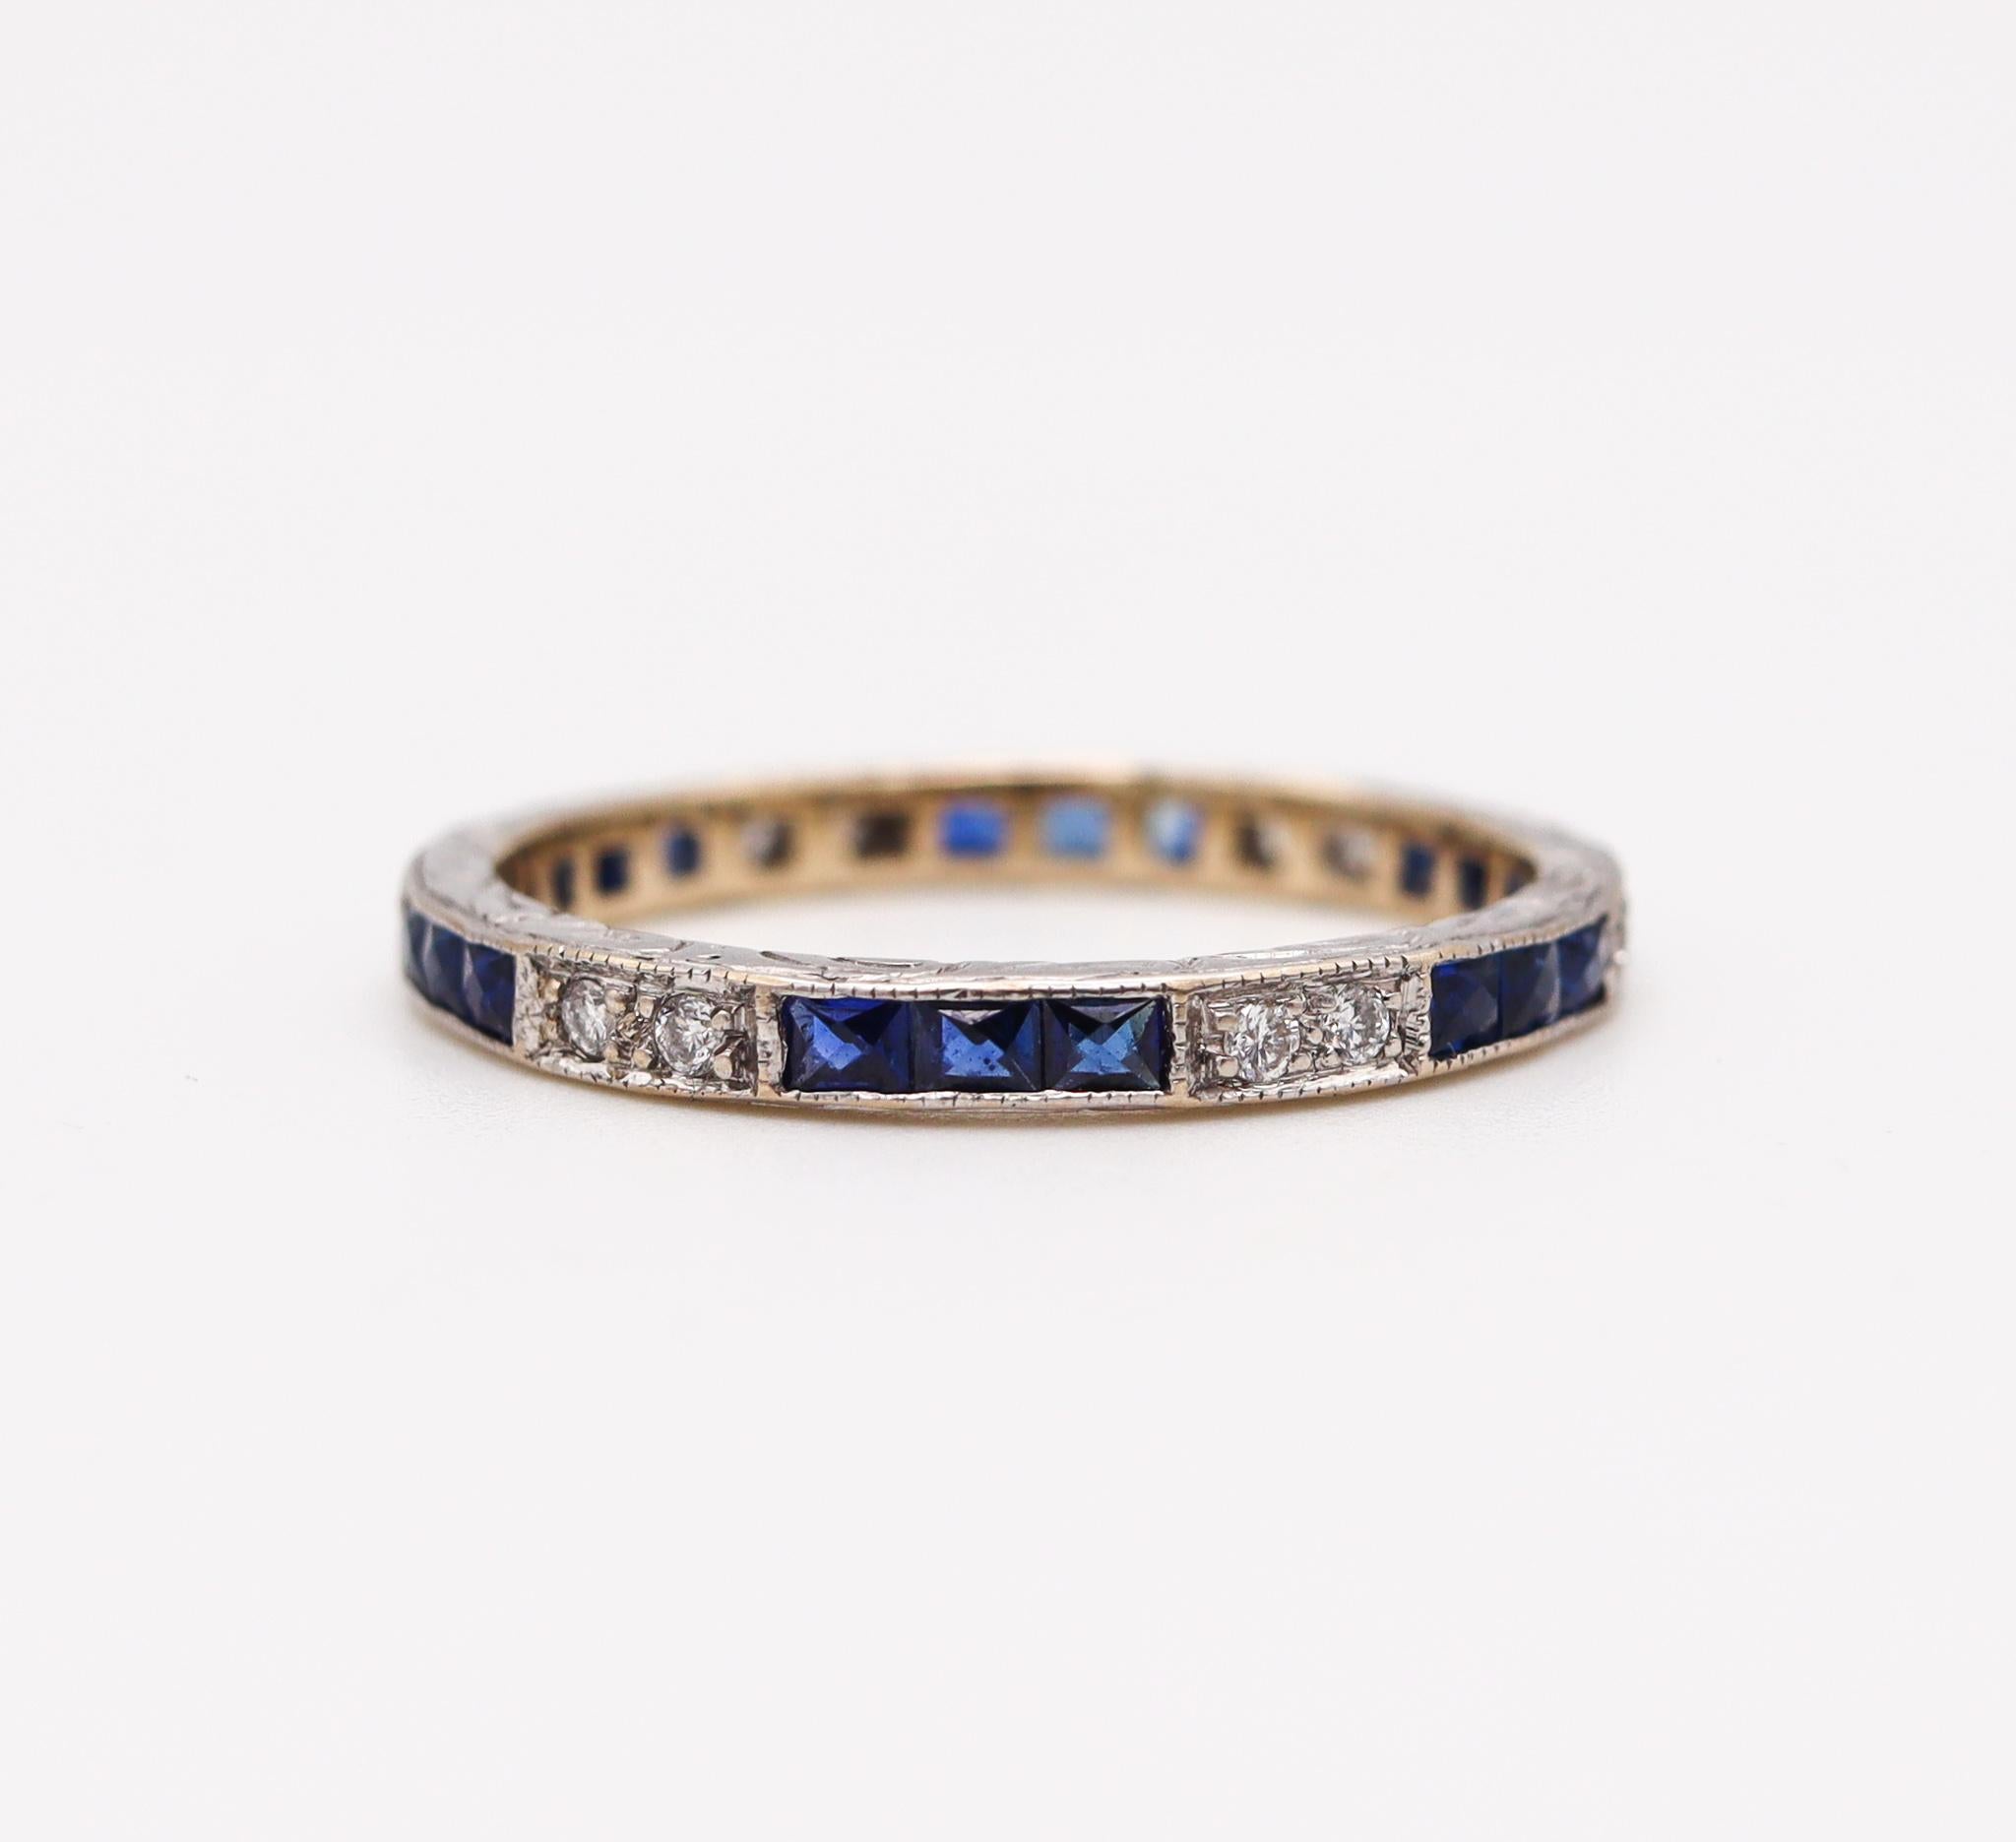 Mixed Cut Eternity Station Ring in 18Kt White Gold with 1.32 Cts in Sapphires and Diamonds